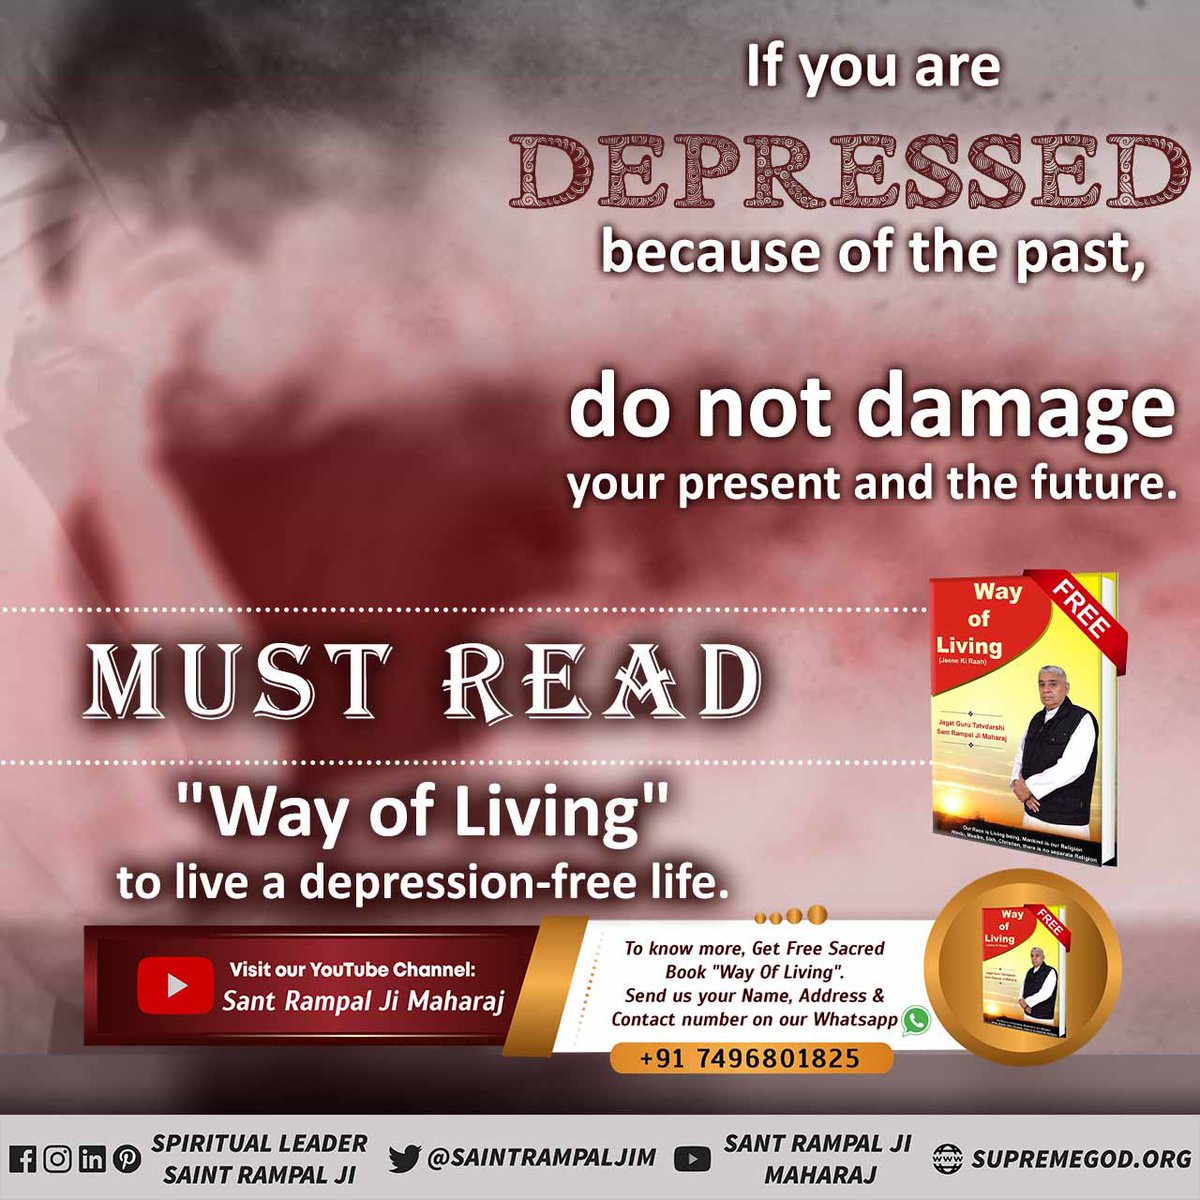 #मानसिक_शांति_नहींतो_कुछनहीं If you are depressed becouse of the past, don't damage your present and the future. Must read 'Way Of Living' to live a depression free life.